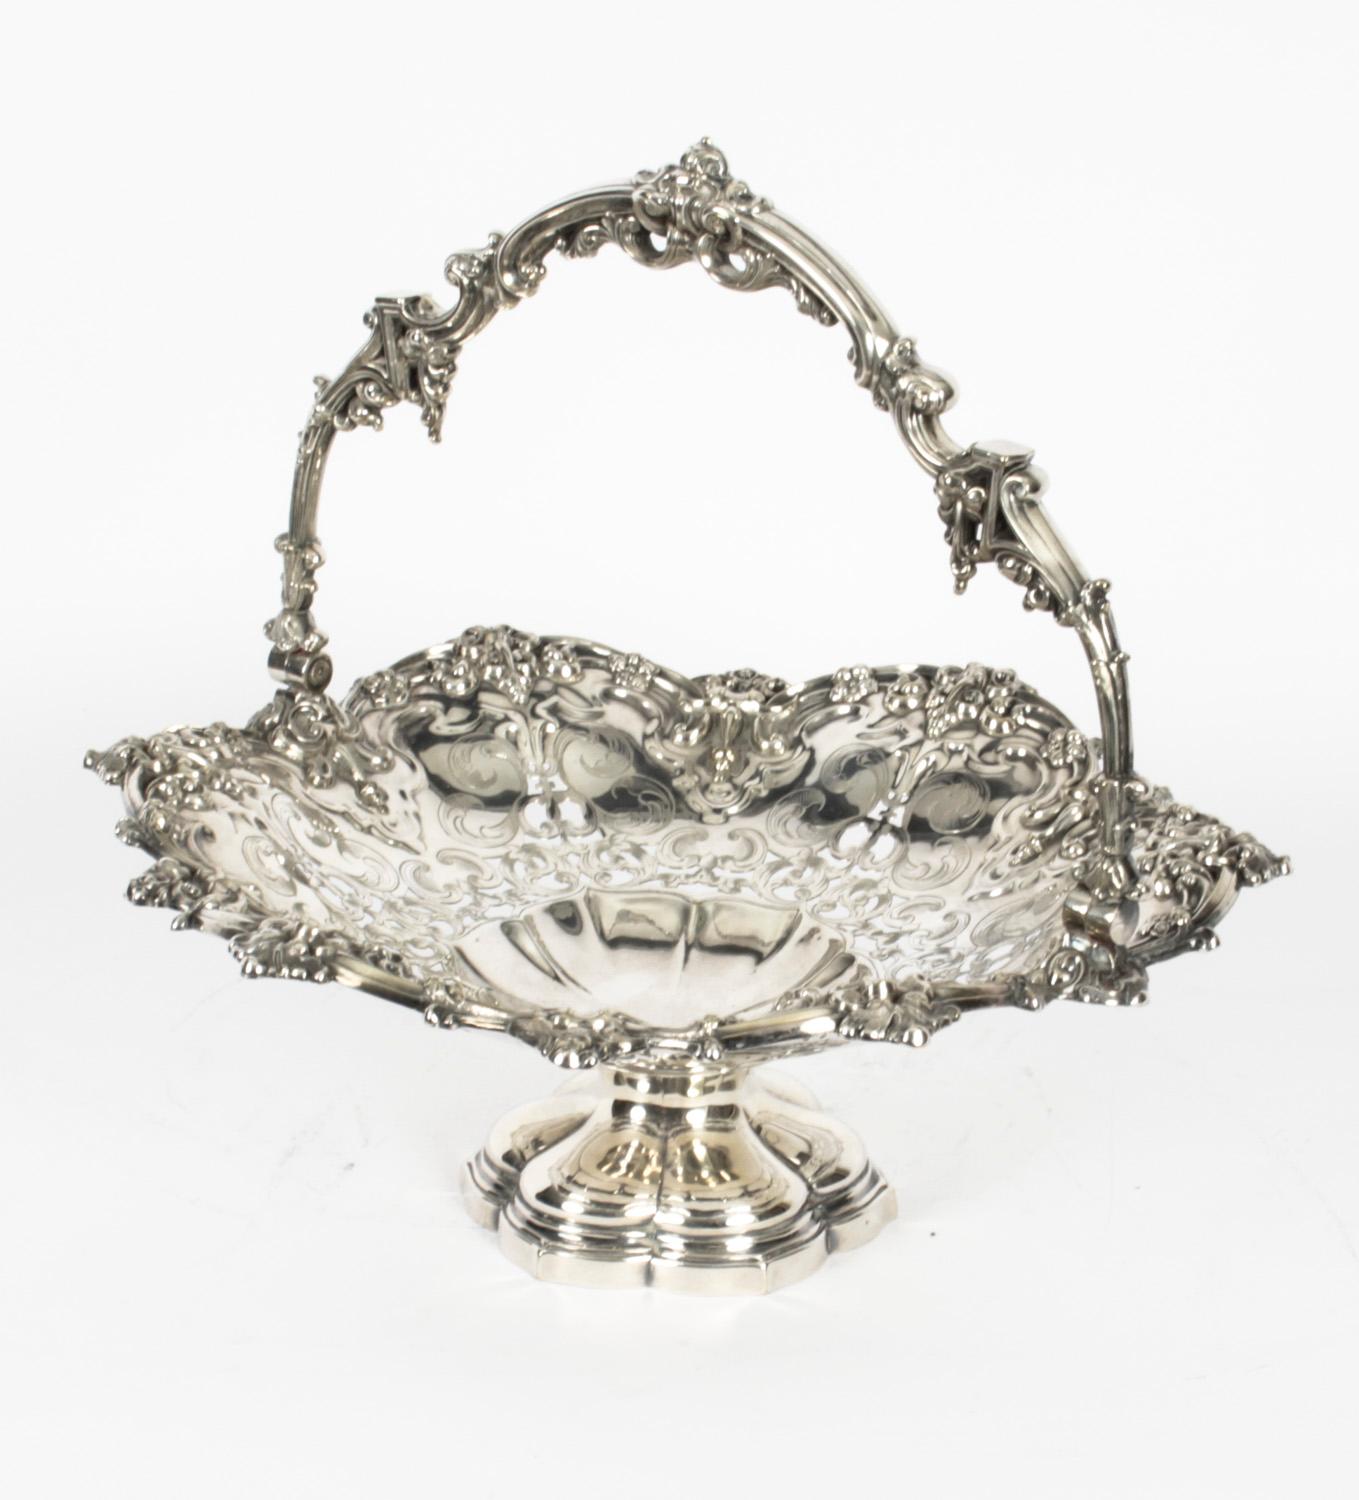 English Antique Silver Plated Fruit Basket Wilkinson & Co 19th Century